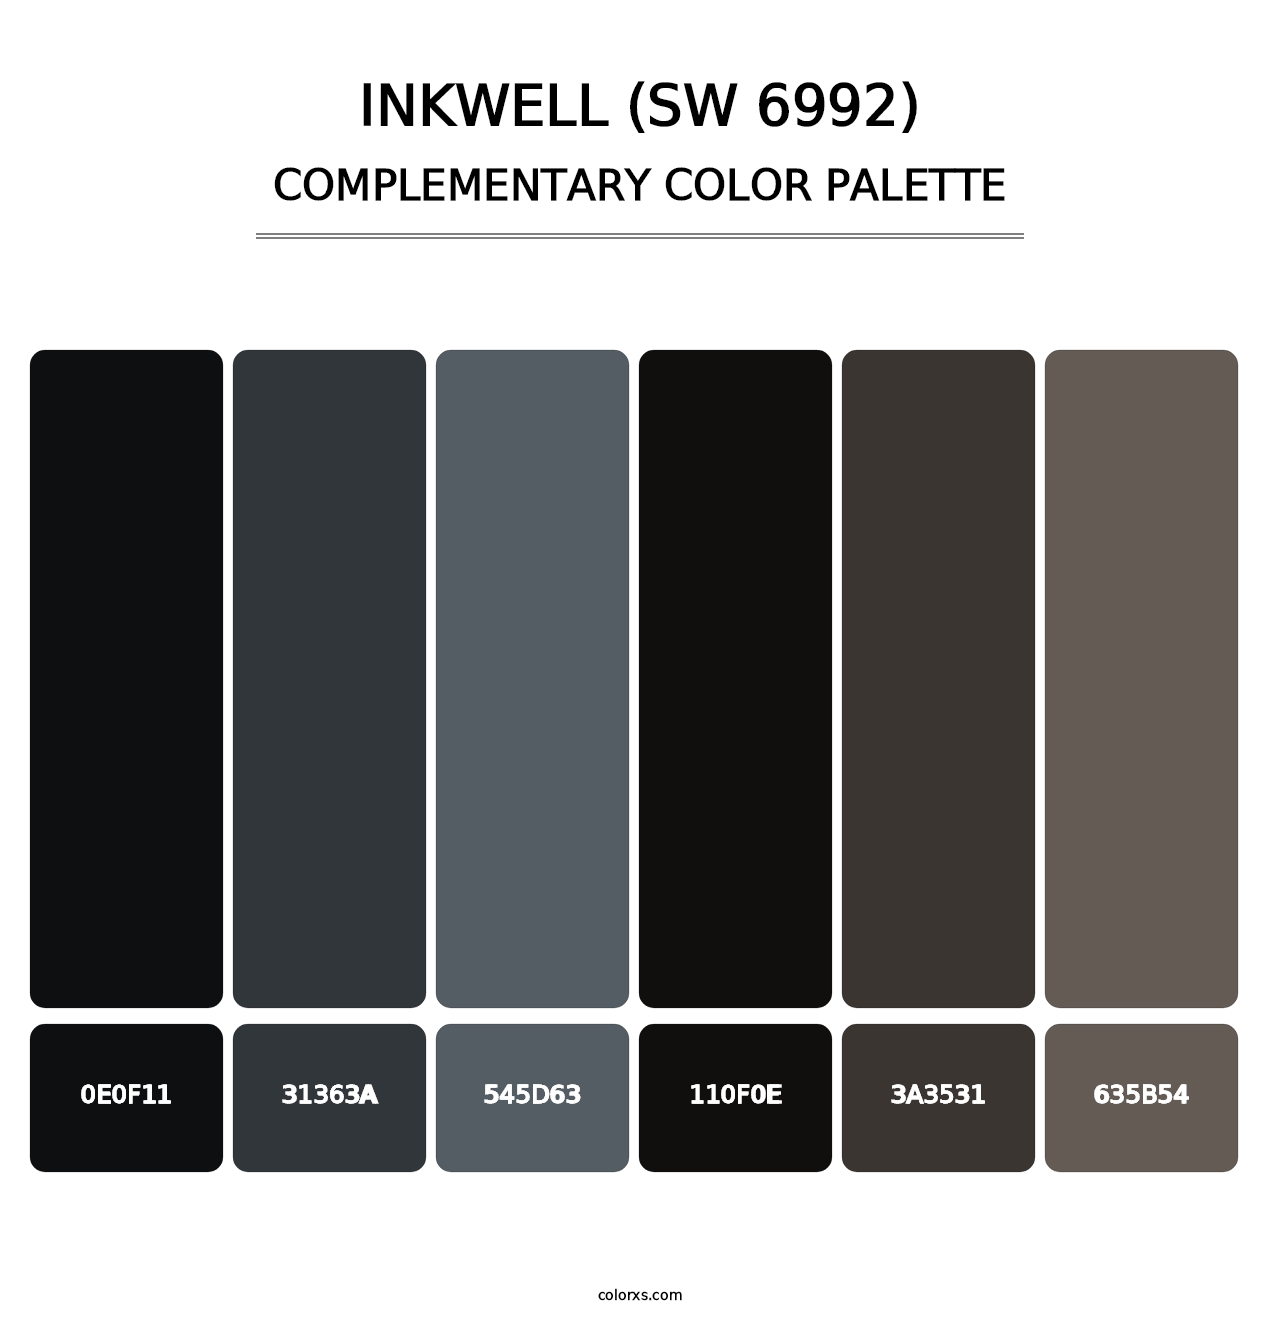 Inkwell (SW 6992) - Complementary Color Palette